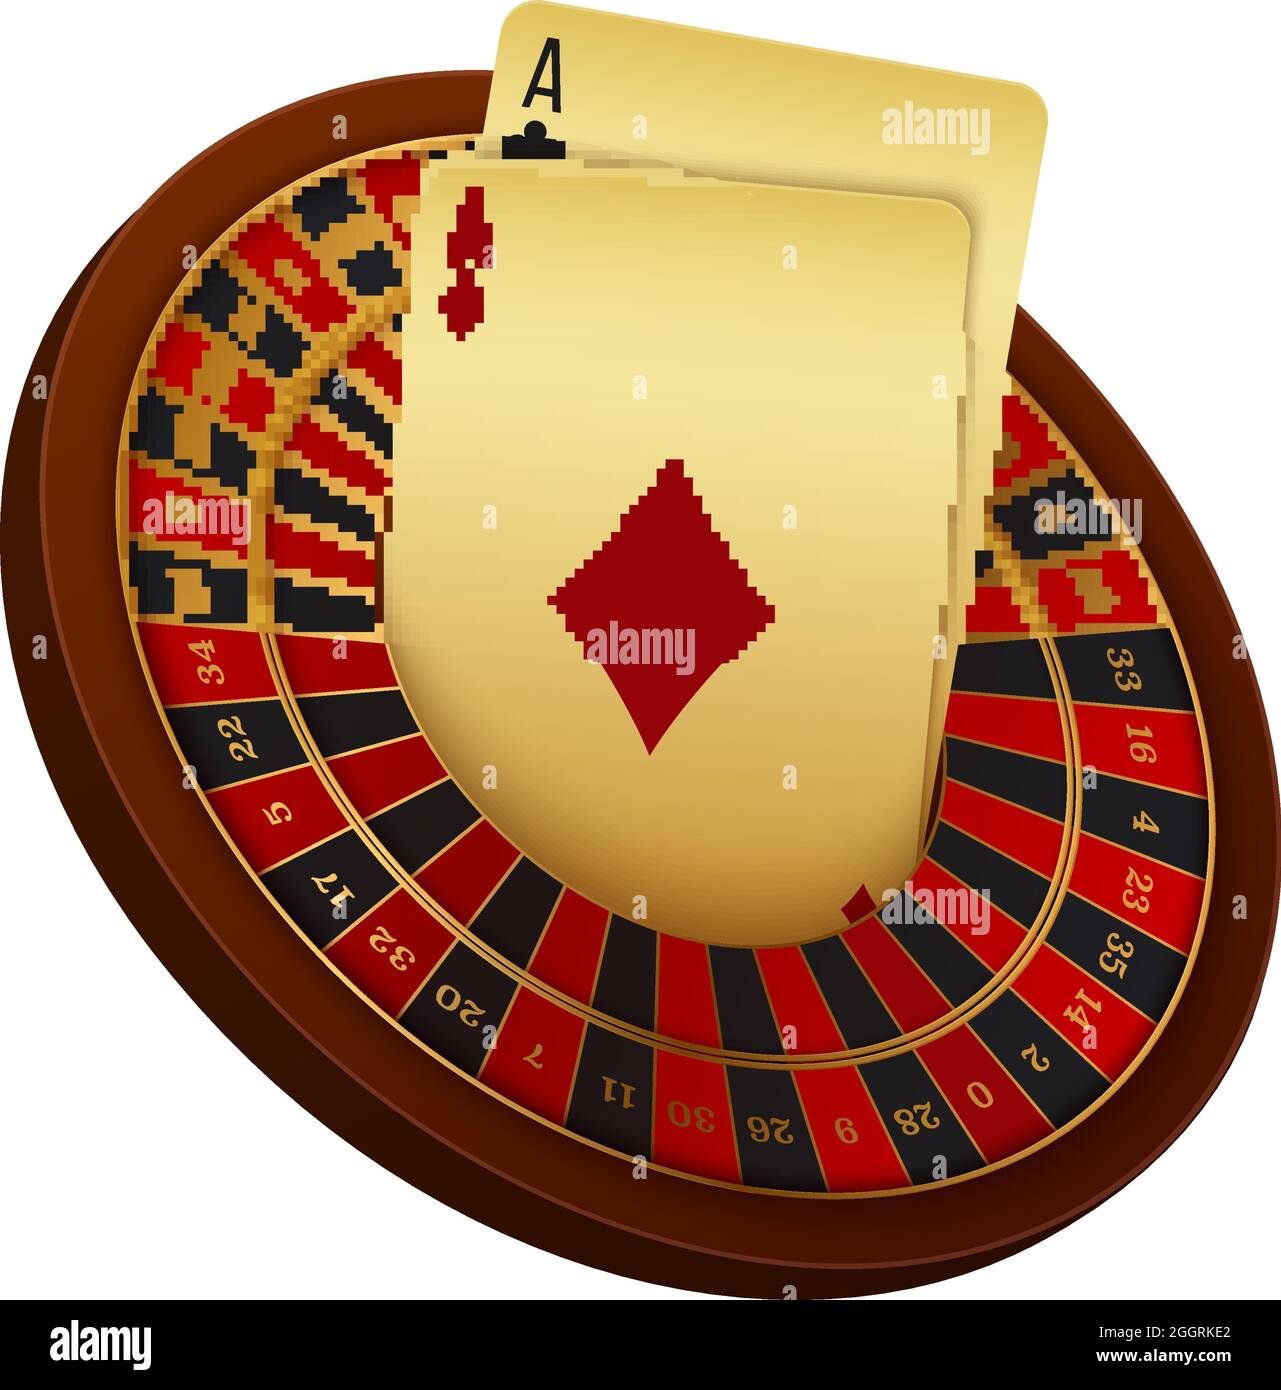 Realistic casino roulette wheel and cards vector illustration Stock Vector